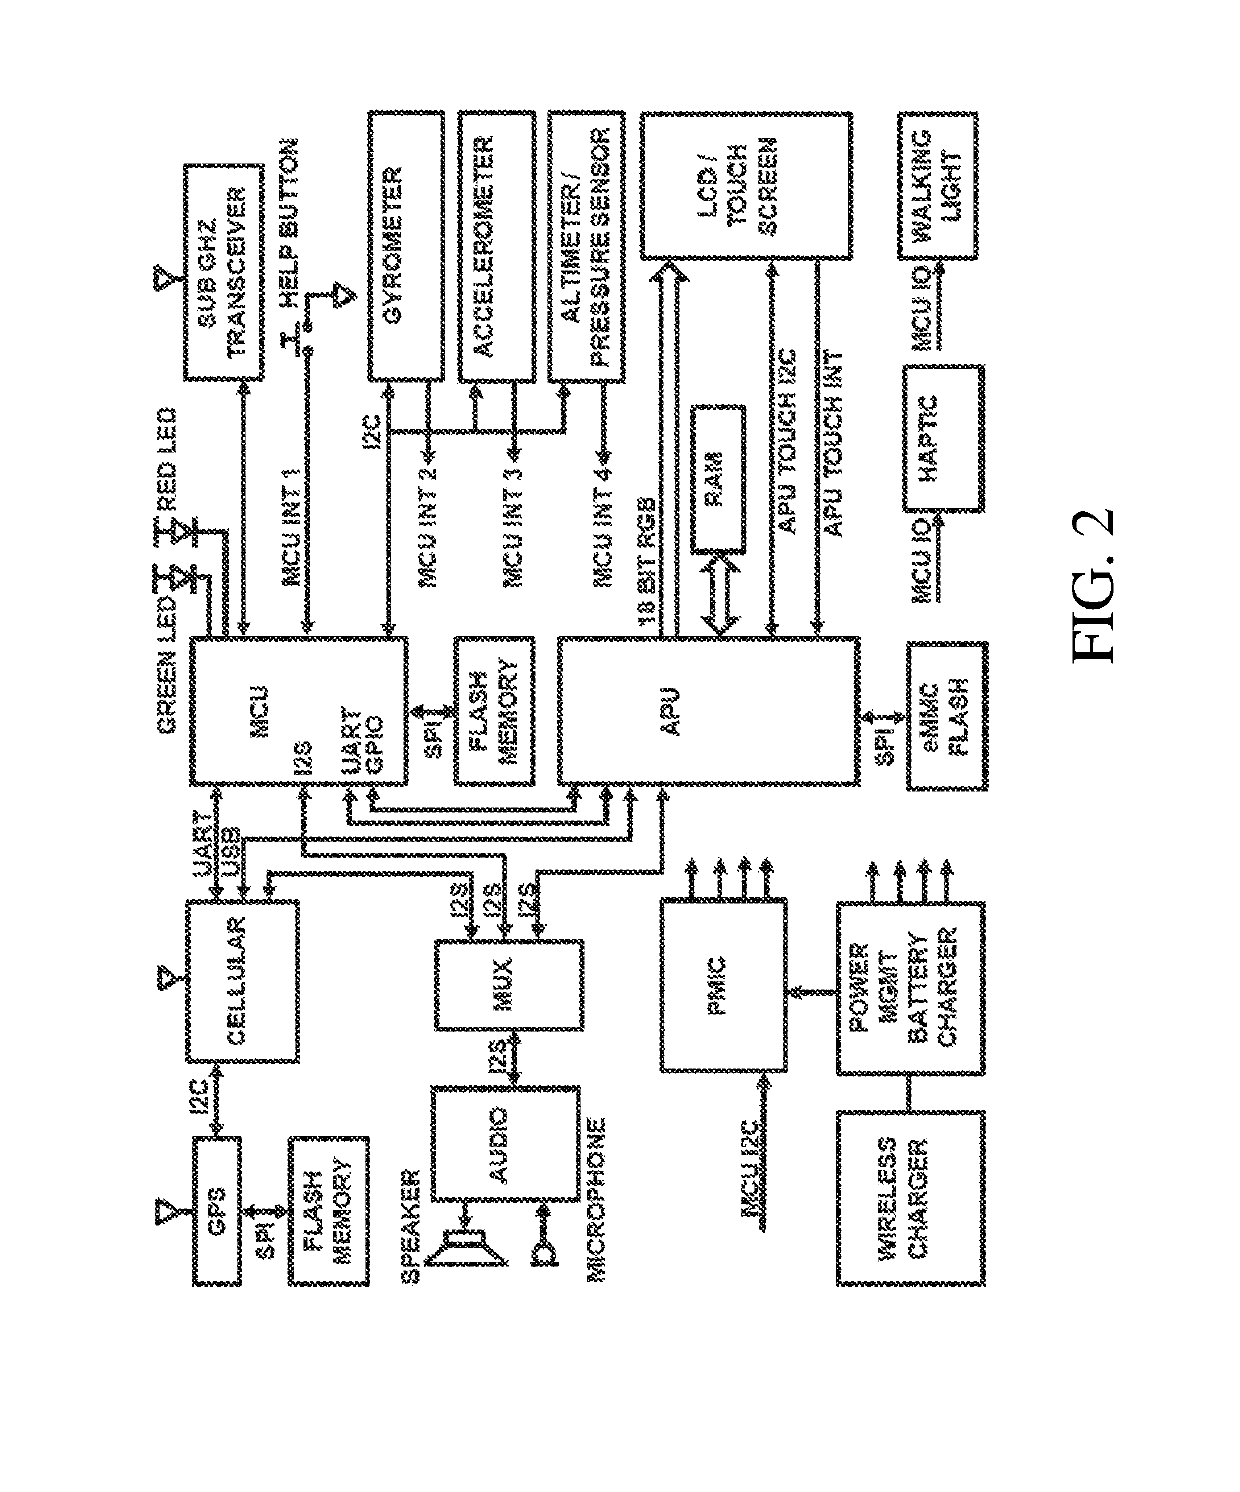 Personal emergency response system and method for improved signal initiation, transmission, notification/annunciation, and level of performance